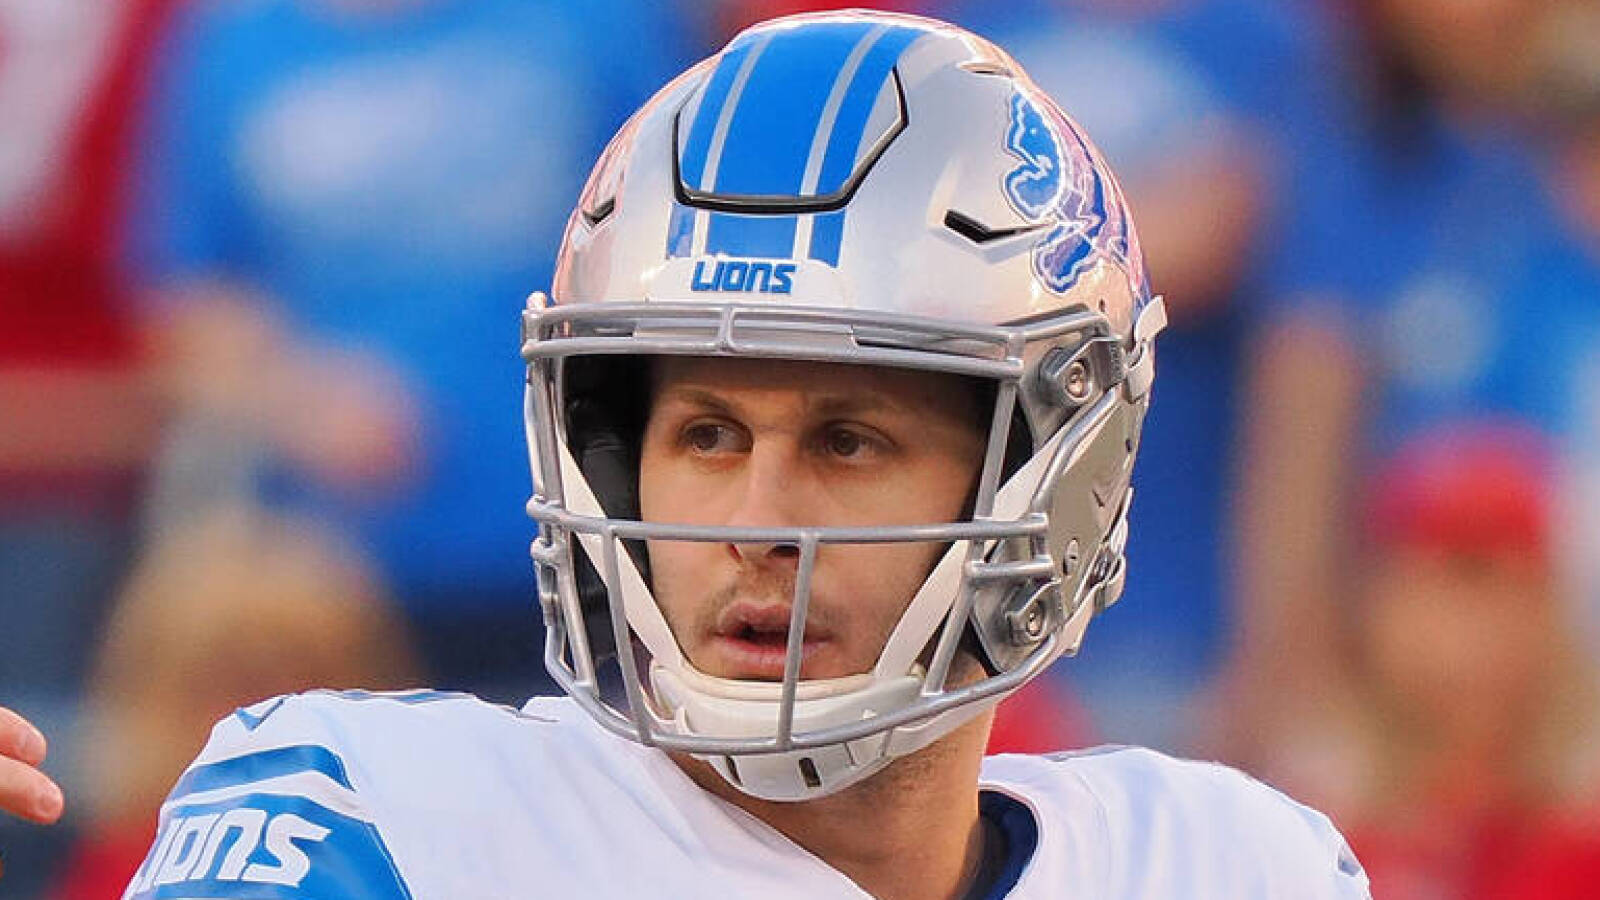 Extension makes Lions QB Jared Goff one of NFL's highest-paid players